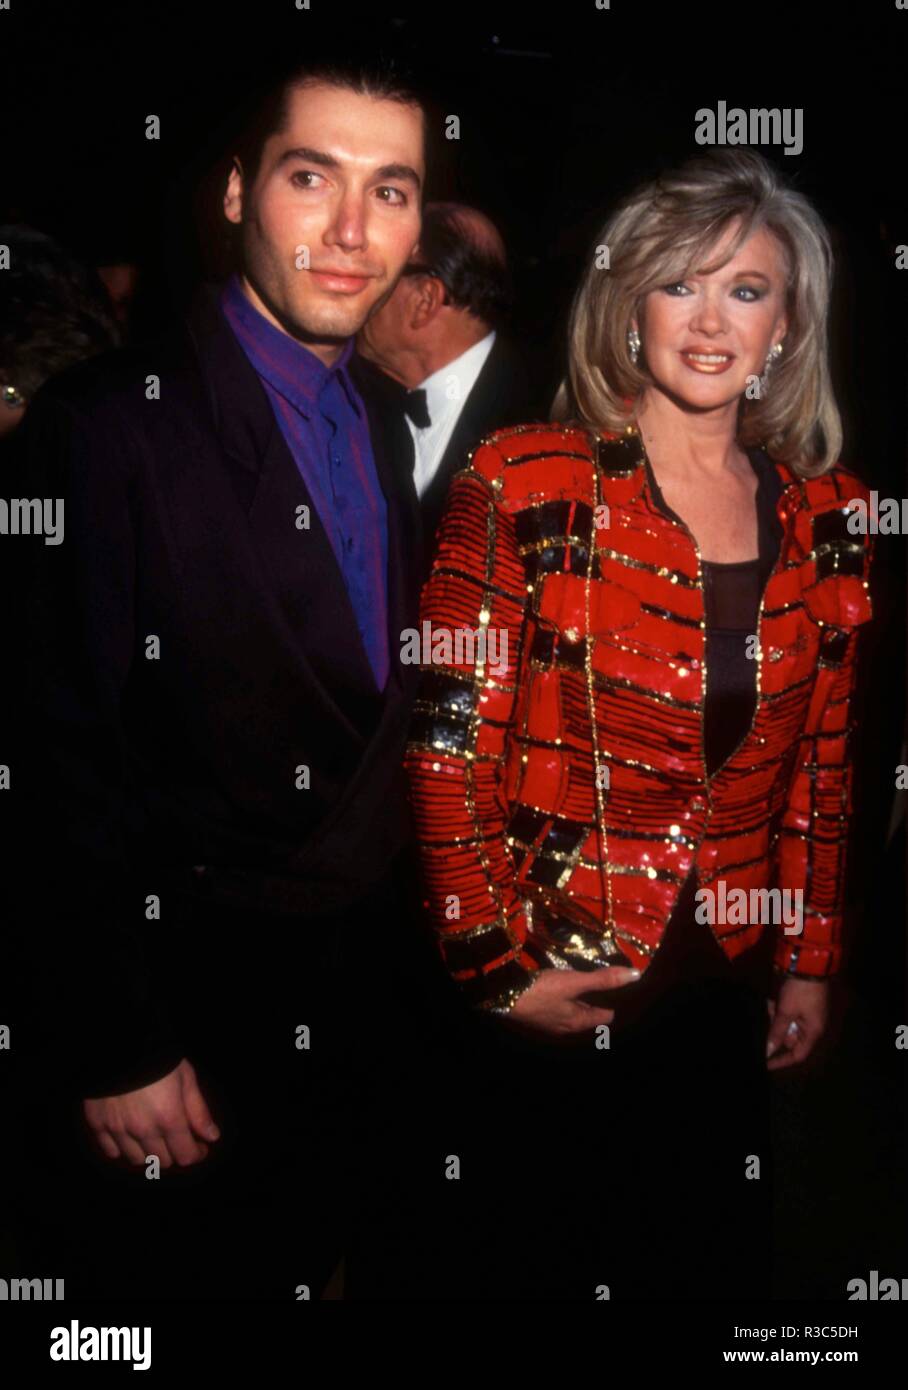 BEVERLY HILLS, CA - JANUARY 29: Actress Connie Stevens and guest attend The Daily Variety Salutes Army Archerd on January 29, 1993 at the Beverly Hilton Hotel in Beverly Hills, California. Photo by Barry King/Alamy Stock Photo Stock Photo